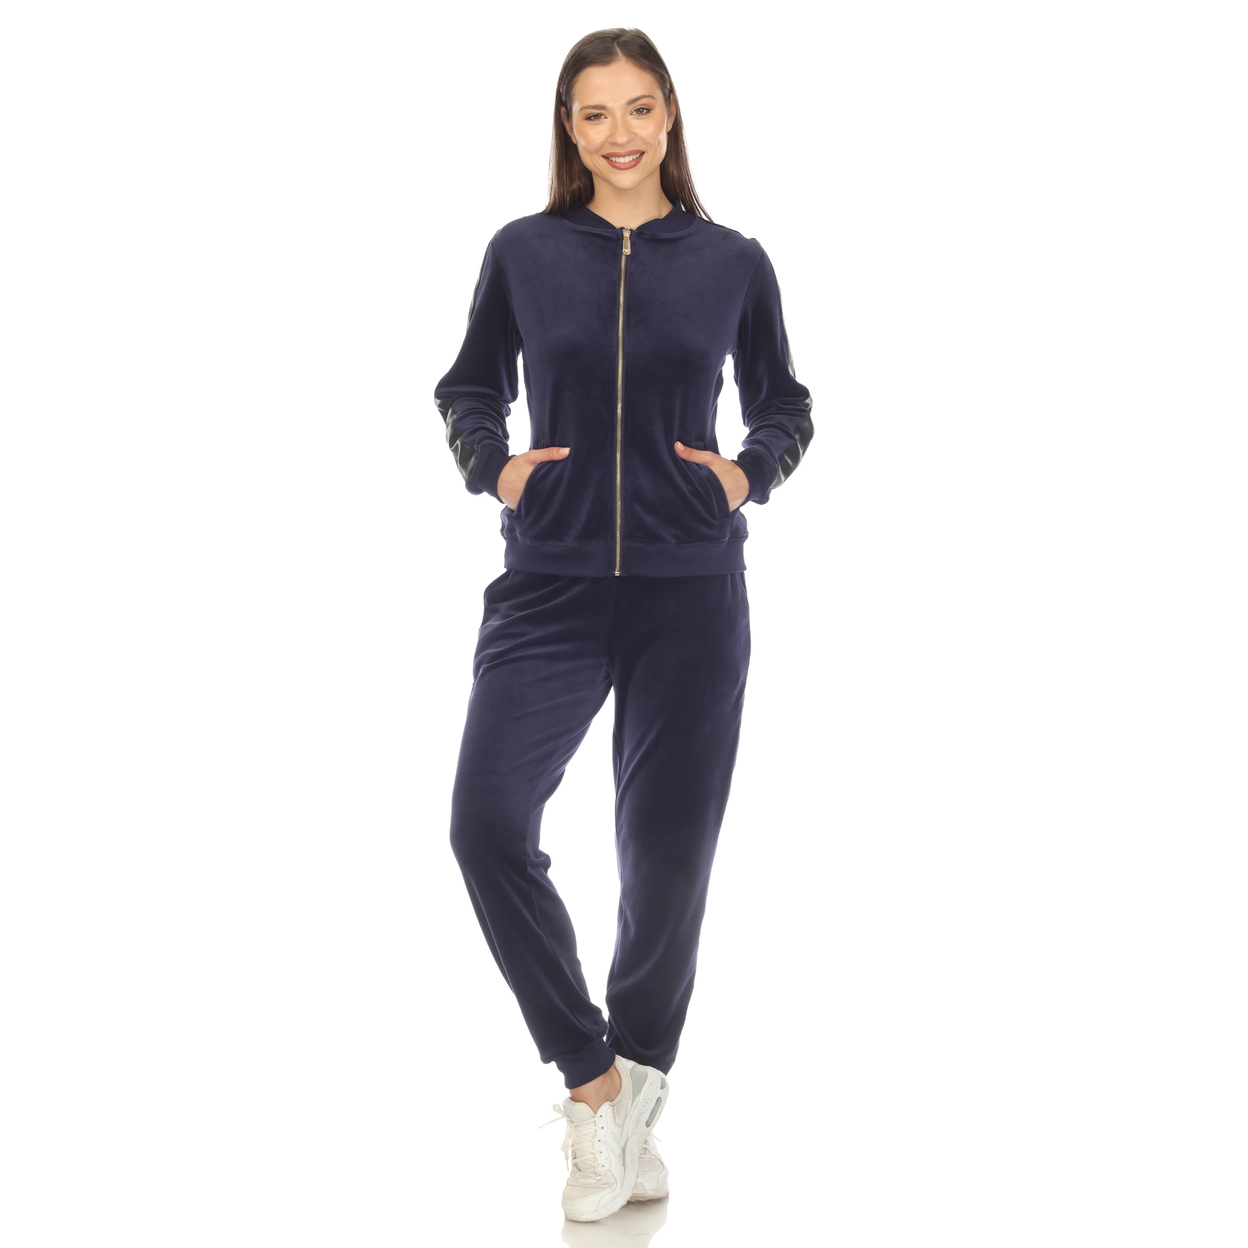 White Mark Women's 2-Piece Velour Tracksuit Set With Faux Leather Stripe - Navy, Large